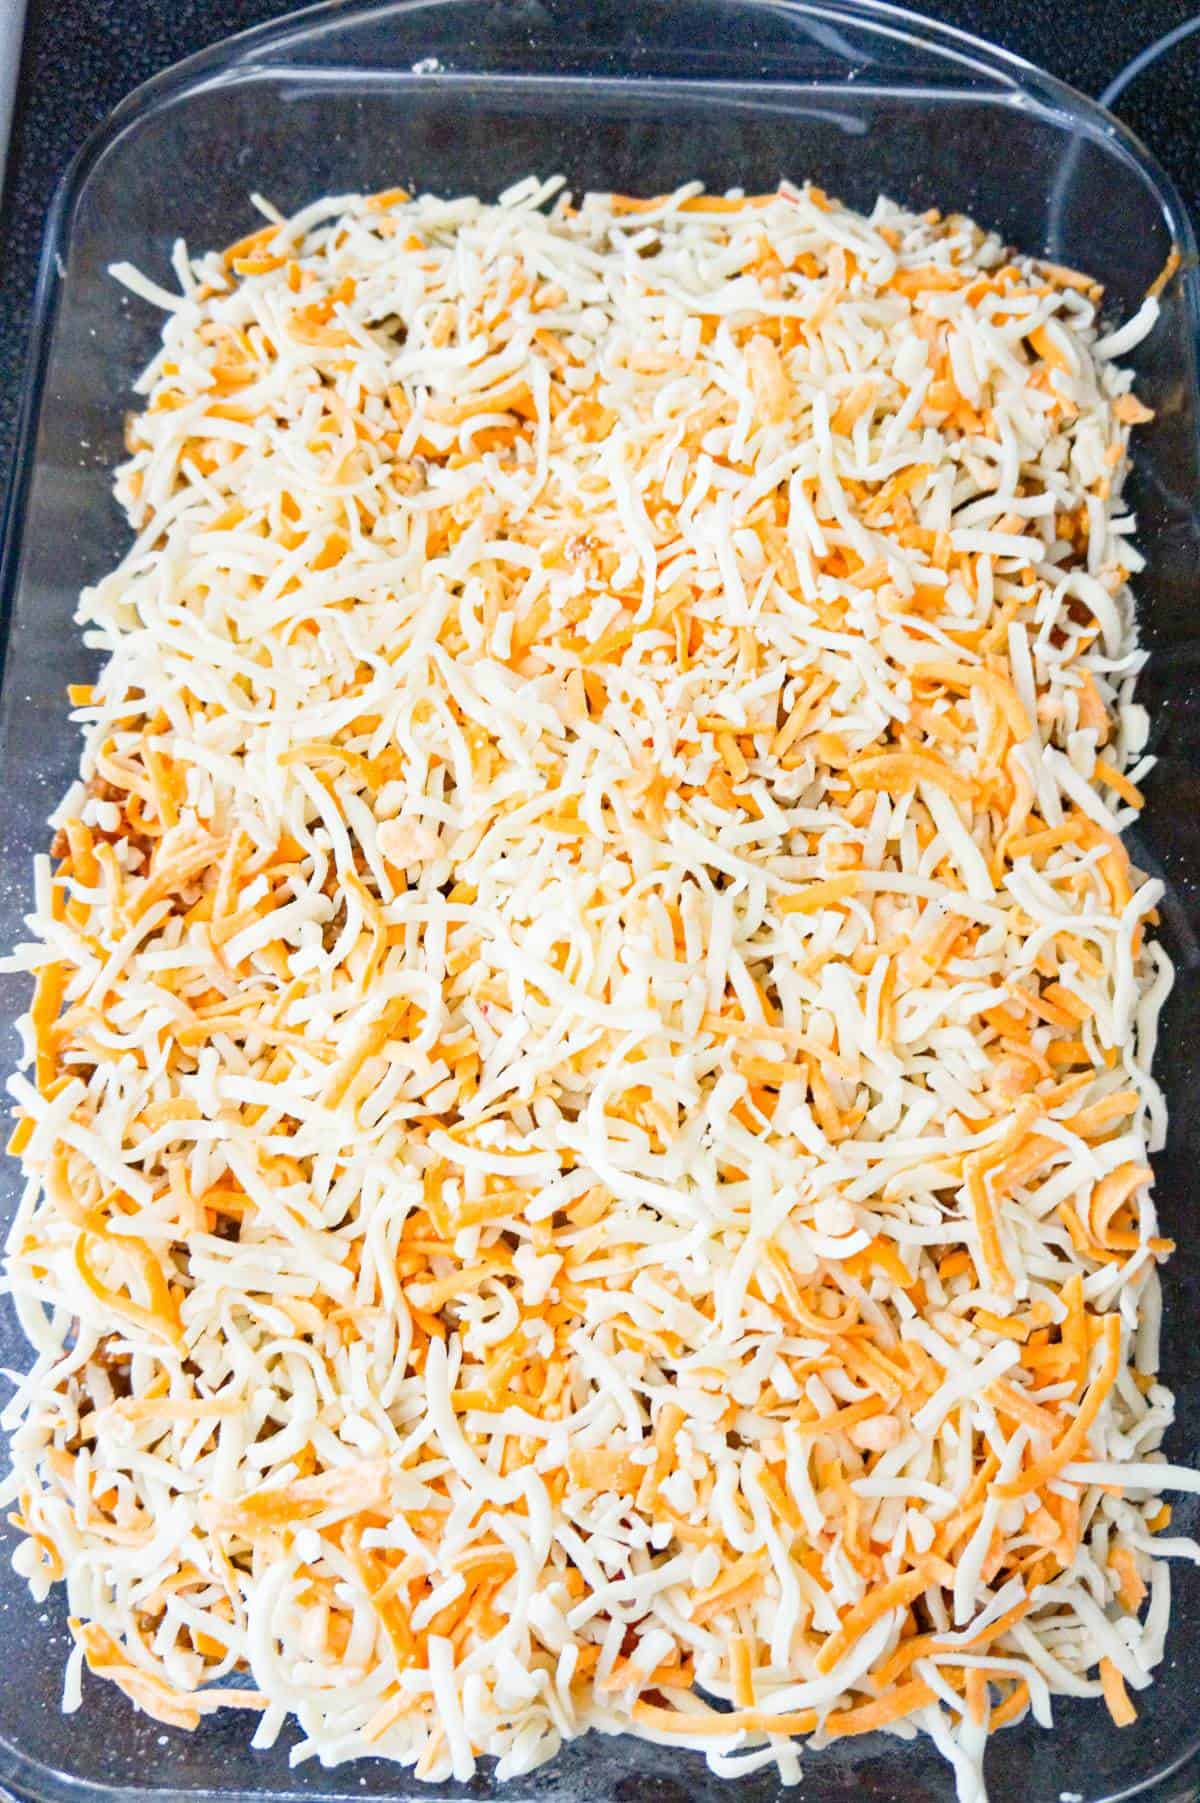 shredded cheese on top of ground beef casserole before baking